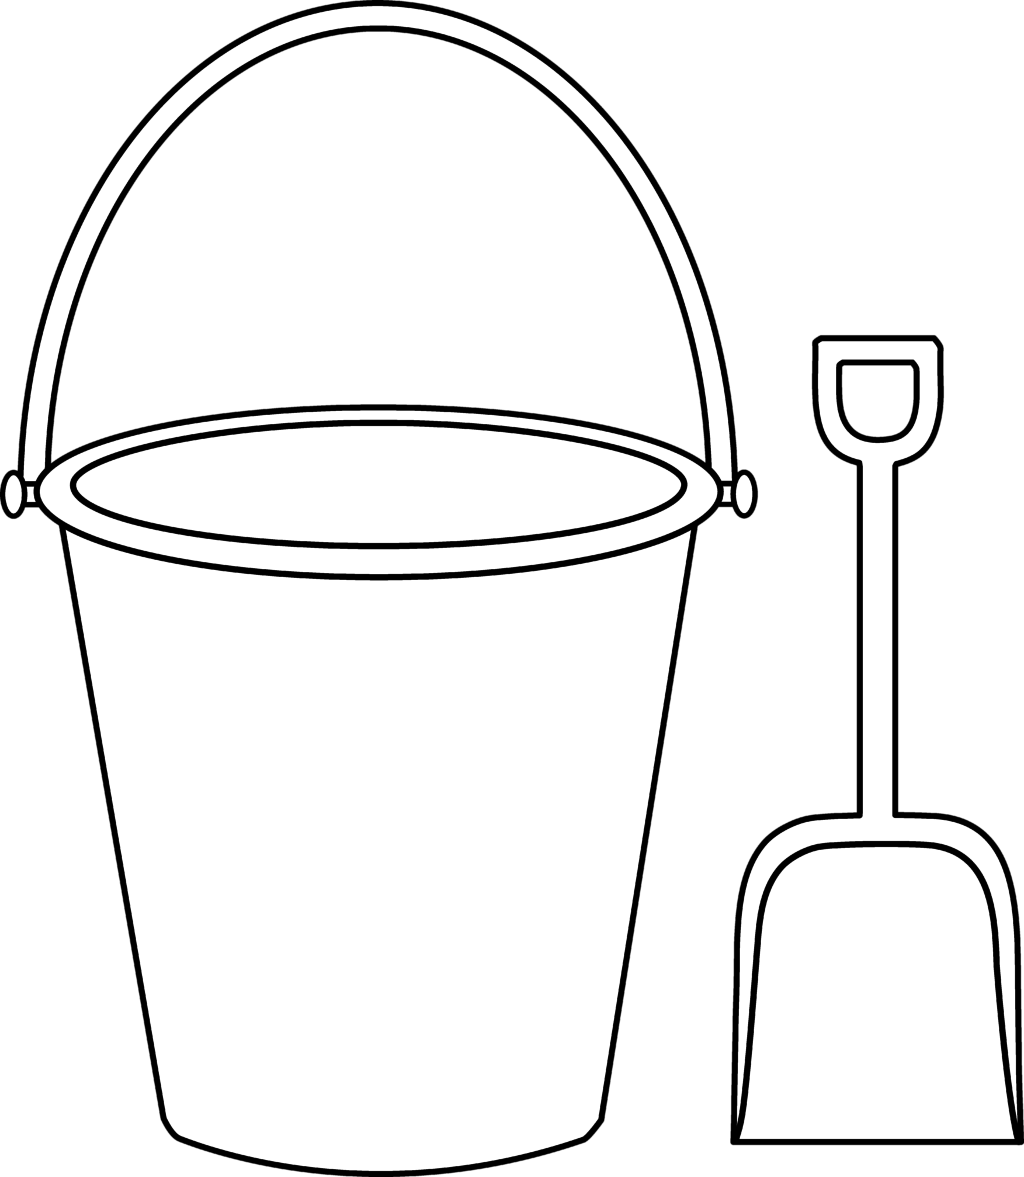 Sand Pail Coloring Page For Kids - Pail And Shovel Coloring Page (1024x1177)